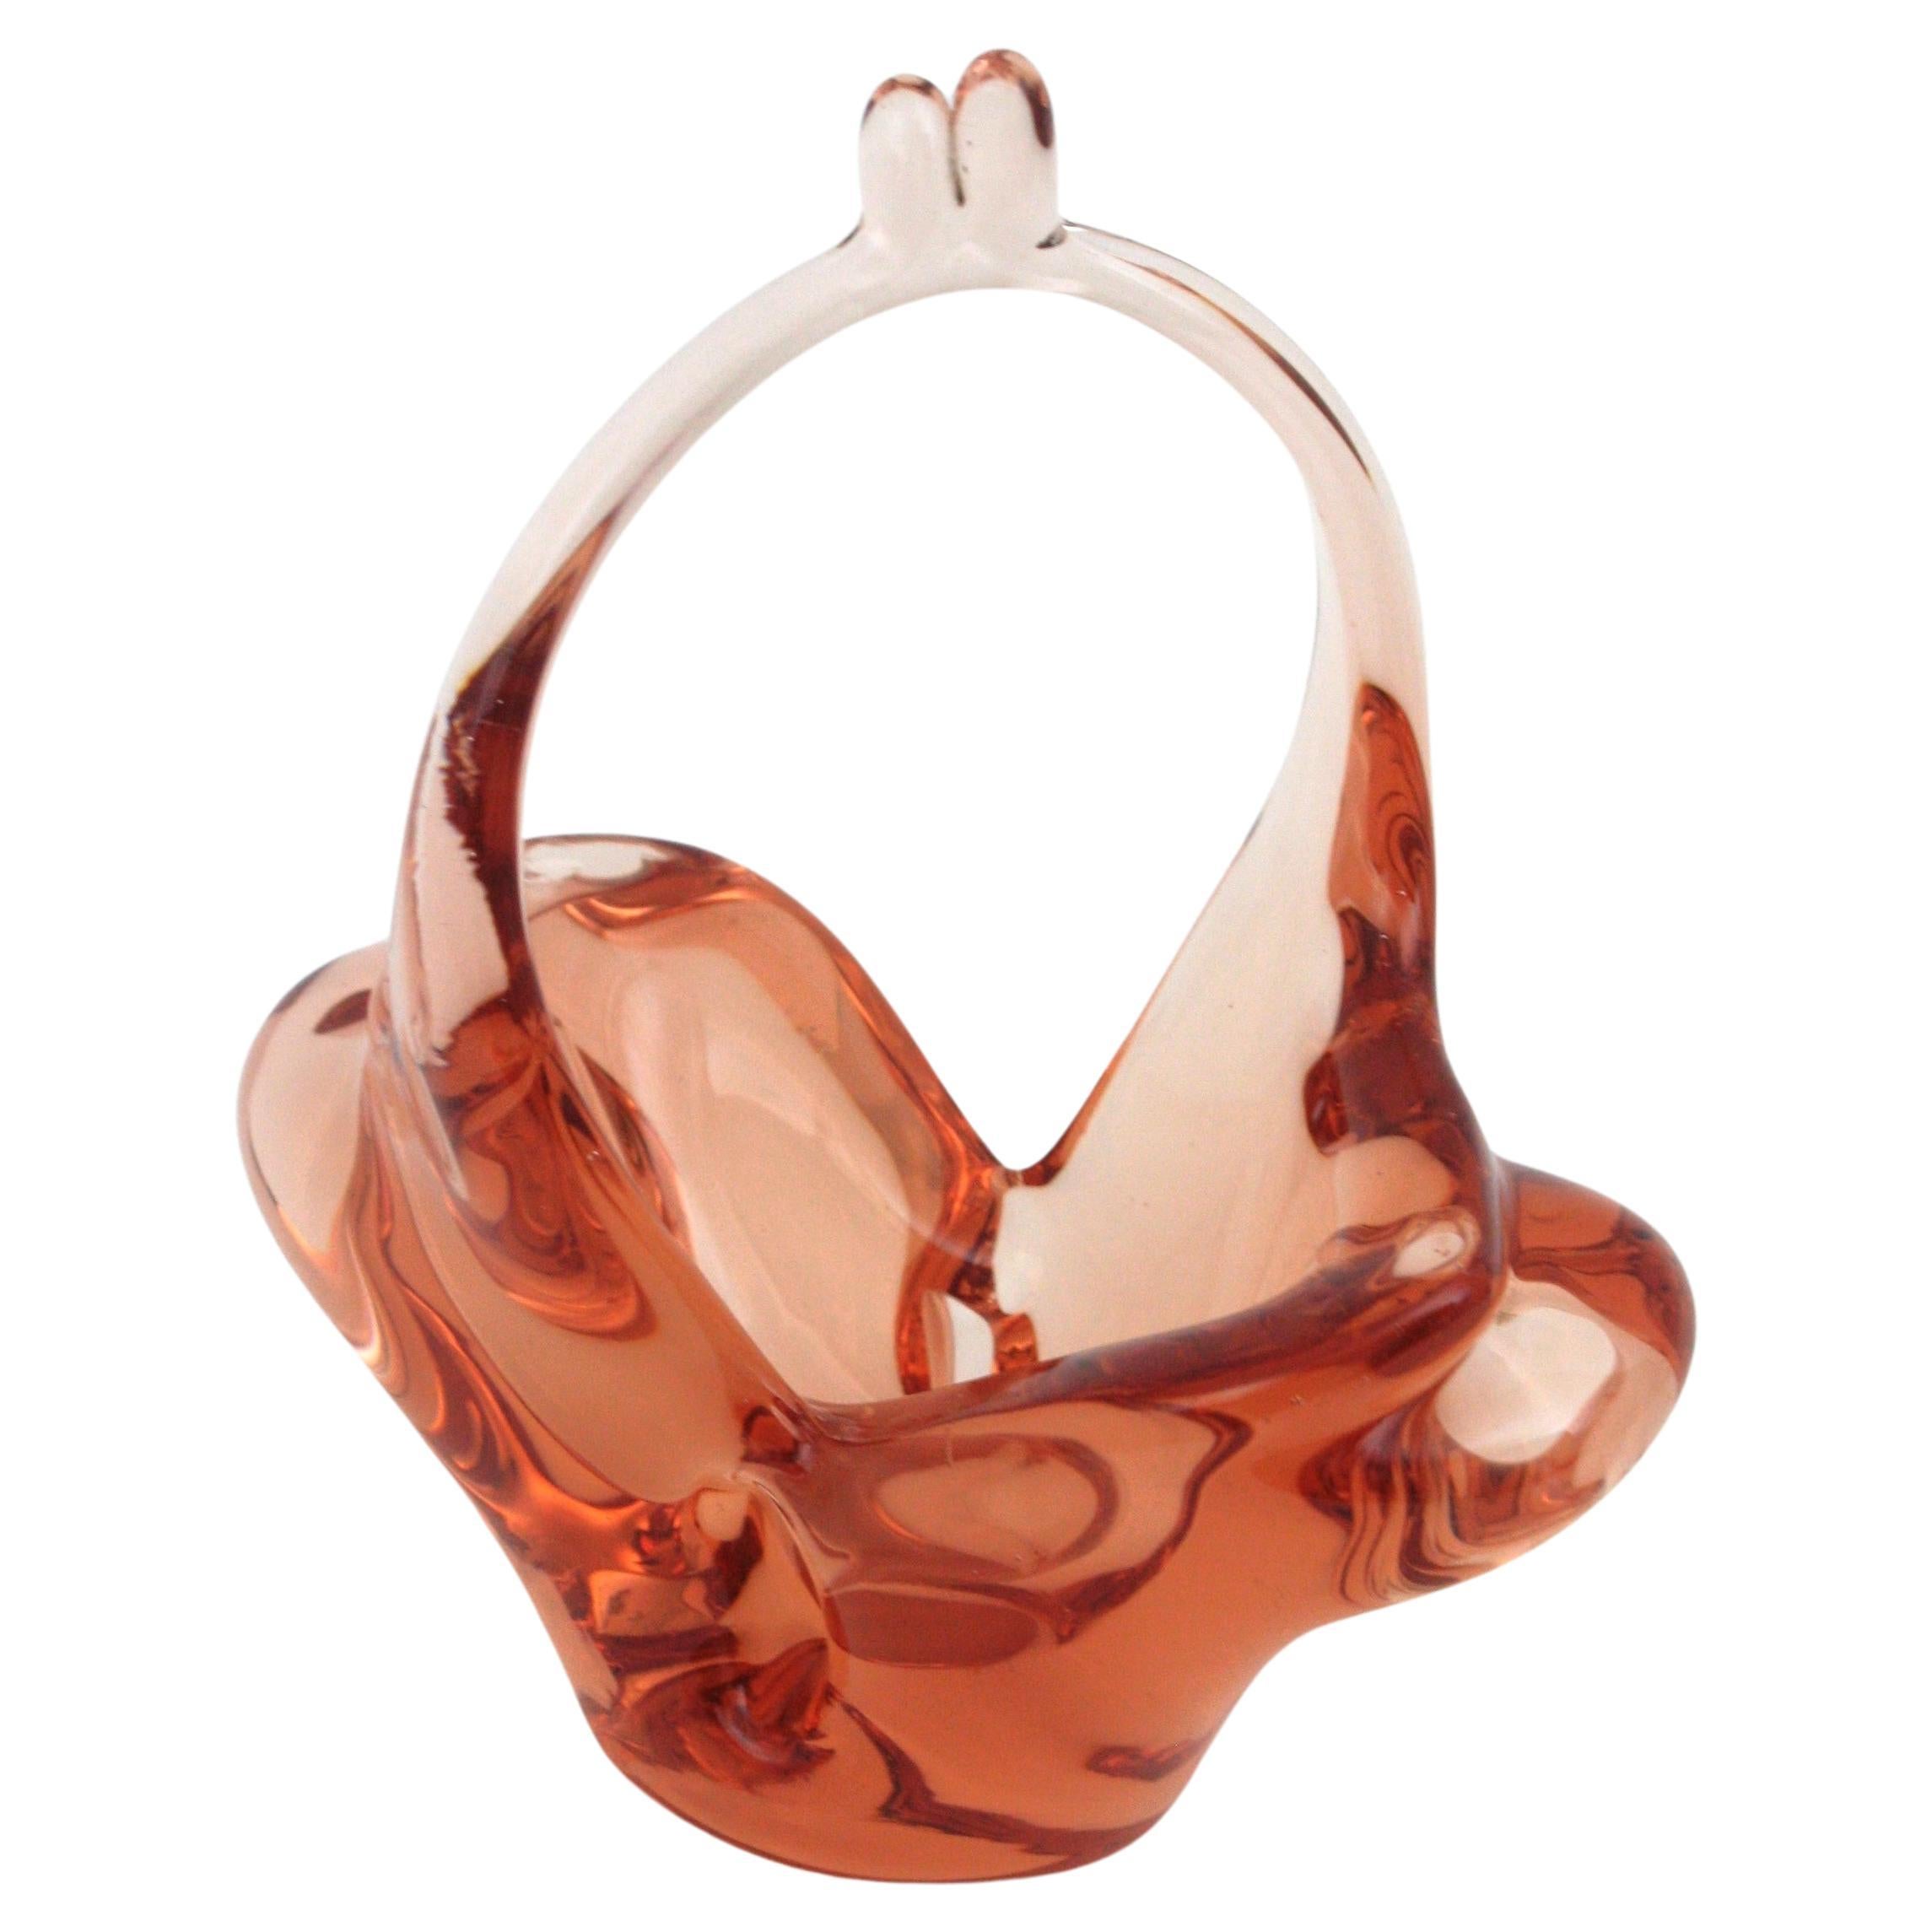 Murano Art Glass Basket Bowl. Italy, 1950s.
Lovely Murano art glass bowl in peach color clear glass. 
Finely executed in the shape of a basket.
Use it as decorative bowl, rings bowl, or candy bowl and display it alone or as a part of a Murano glass